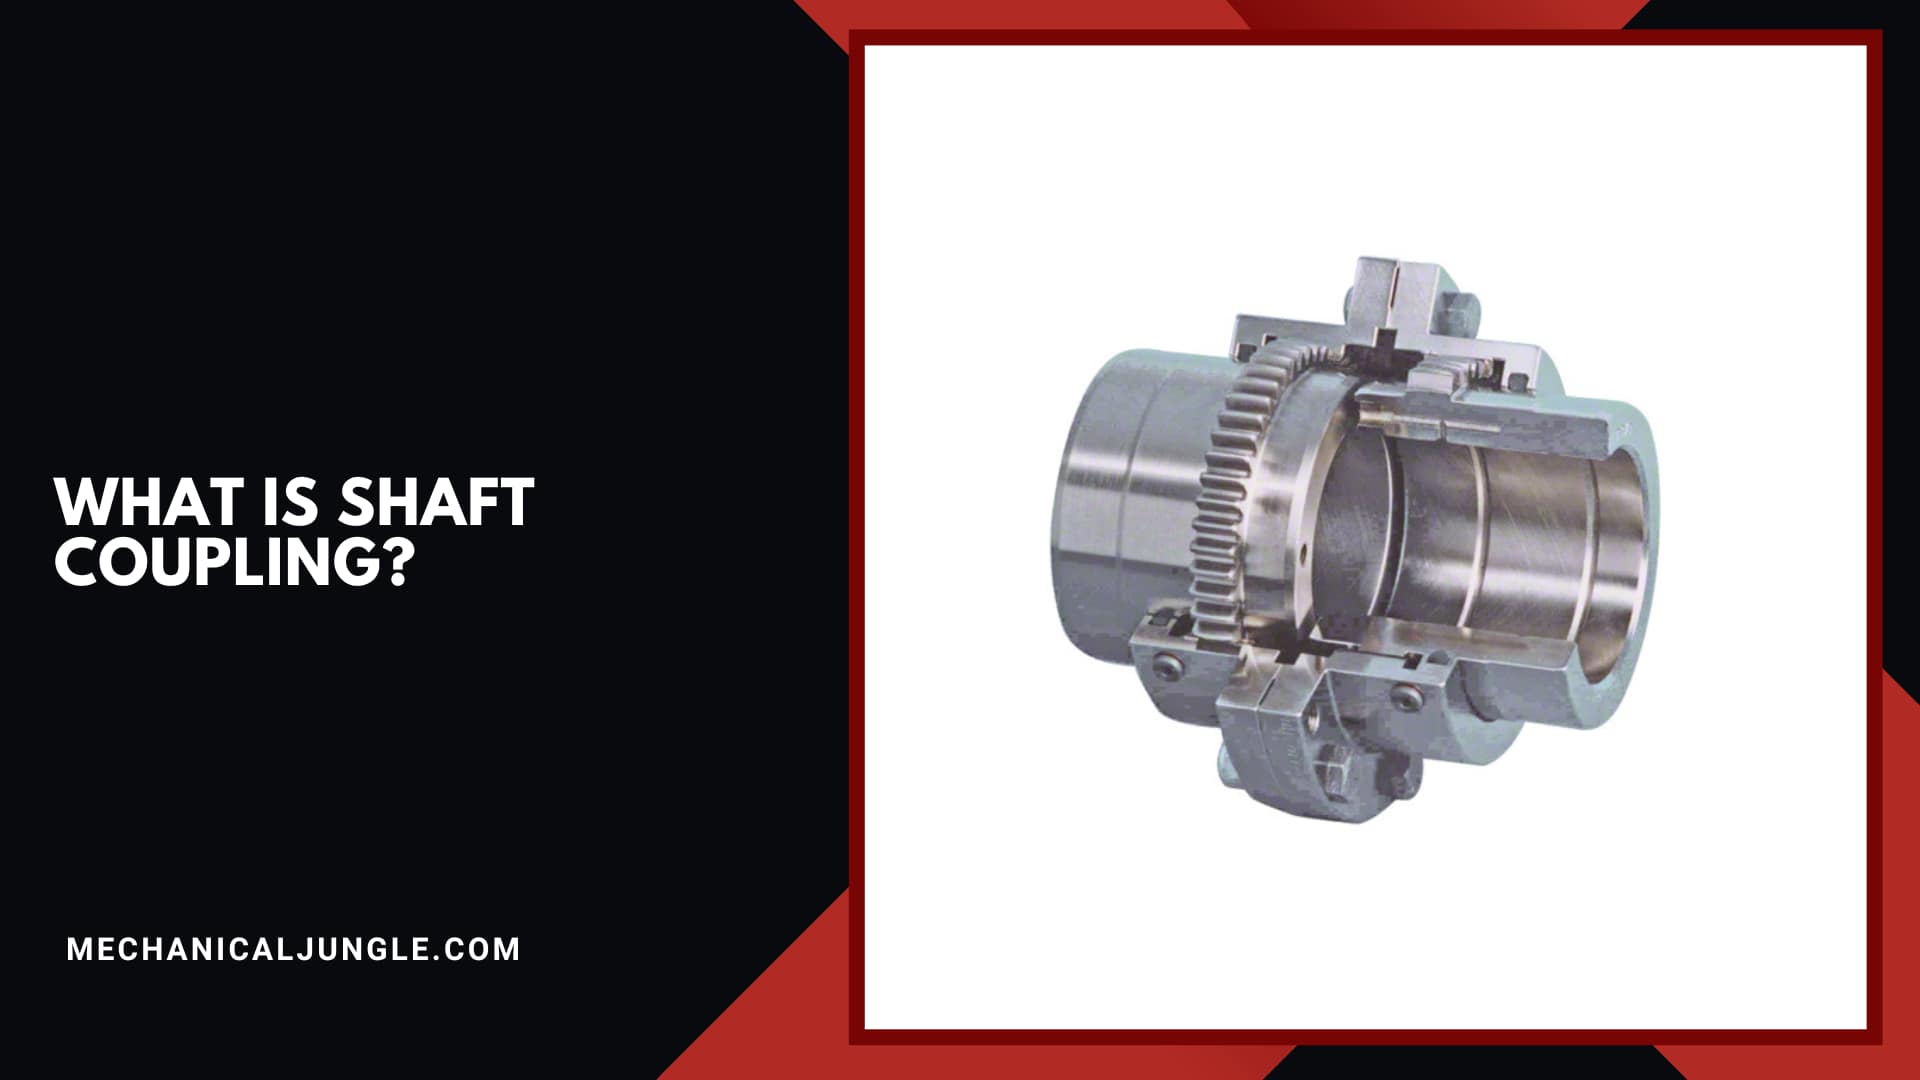 What Is Shaft Coupling?